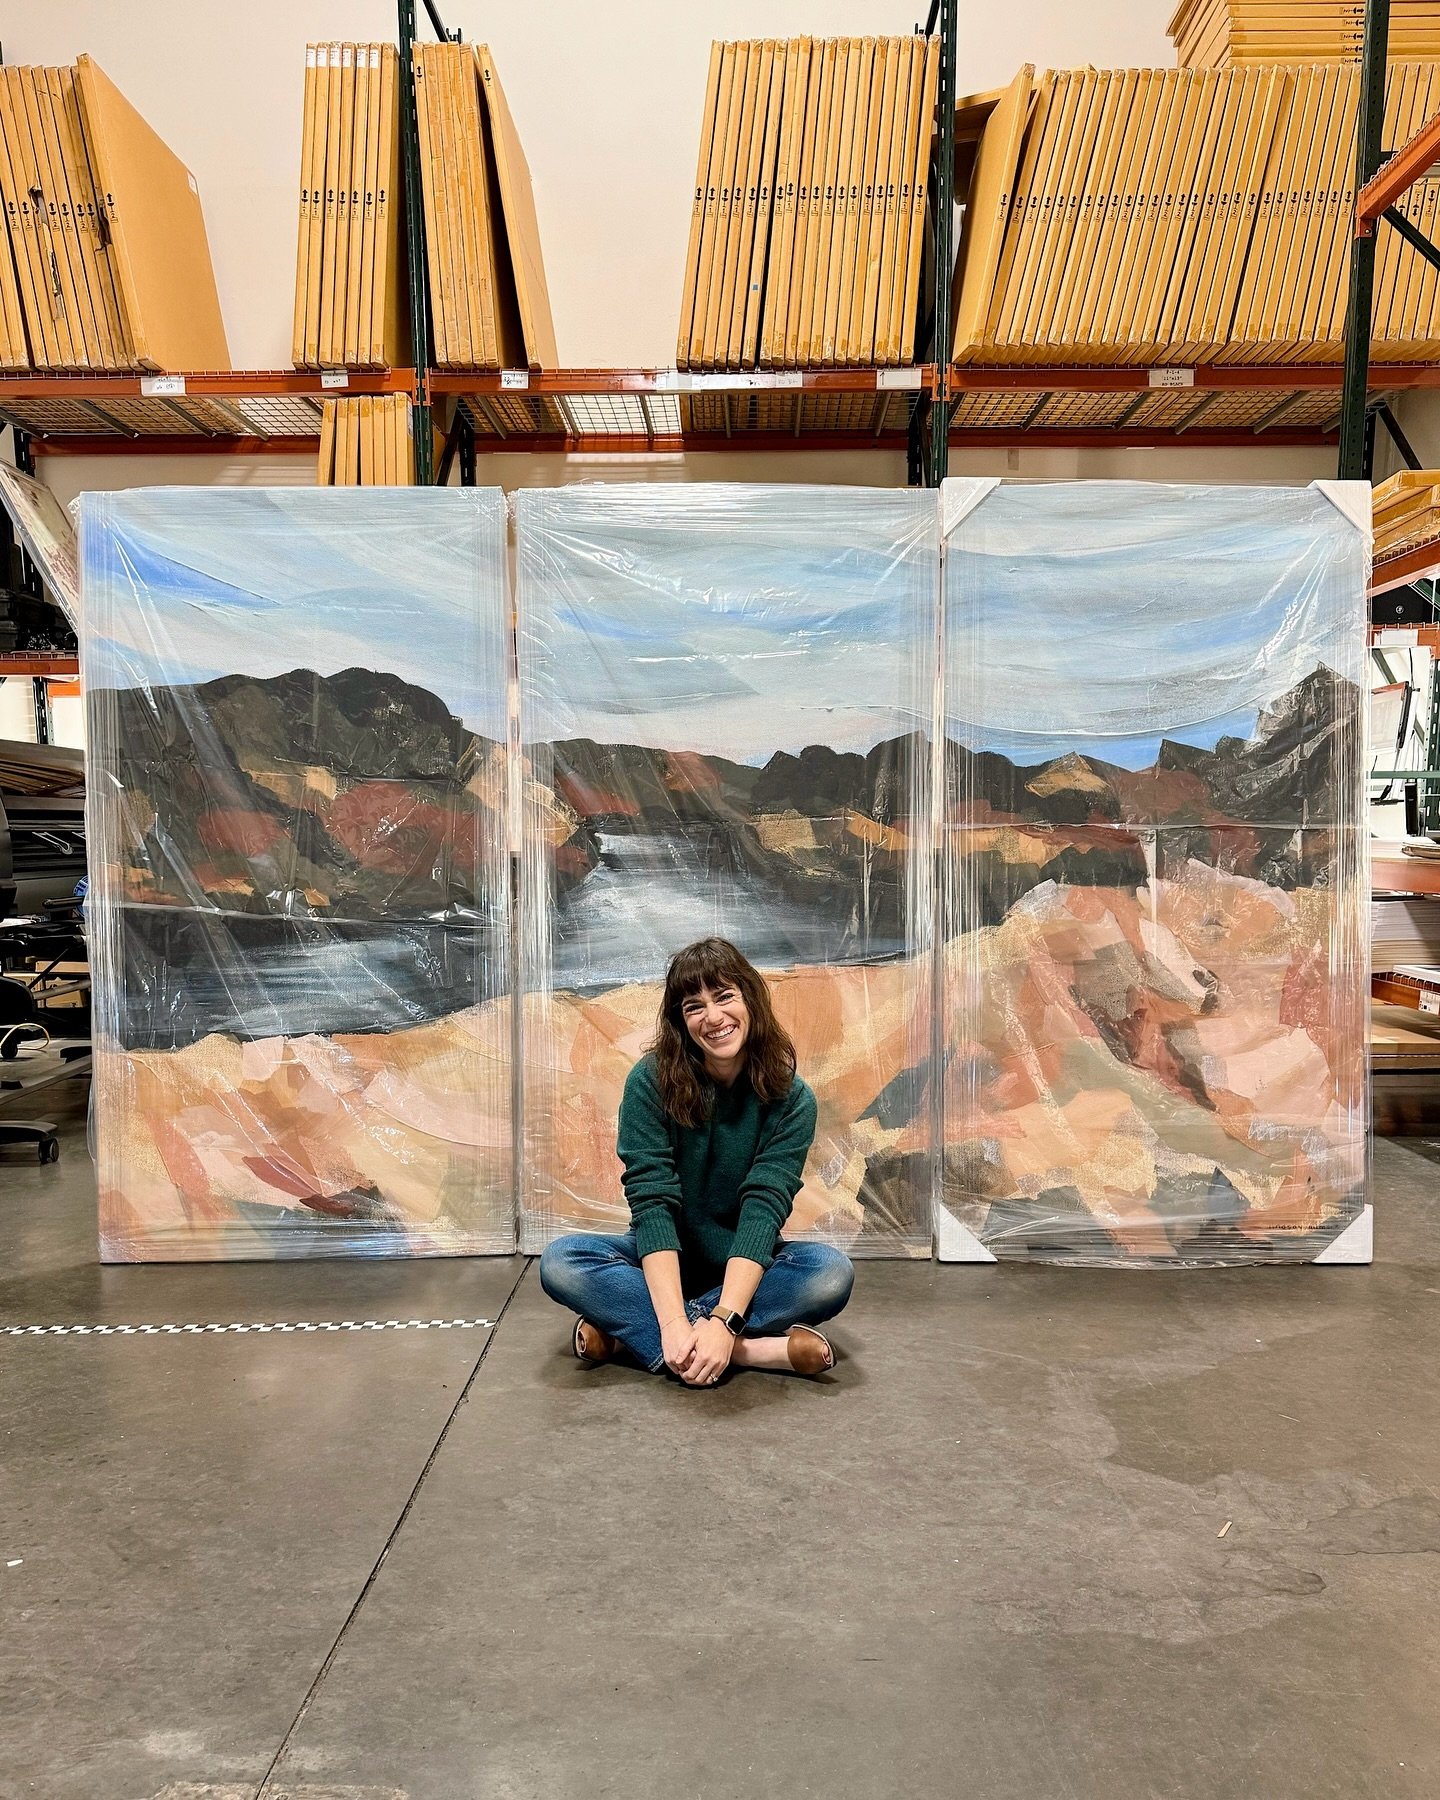 Just delivered this GIANT triptych of my &ldquo;DRT&rdquo; print! It&rsquo;s going to live behind the bar at the new Forest House at @calderasprings! I can&rsquo;t wait to go see it in person. Check it out the next time you&rsquo;re in Sunriver. 🤗